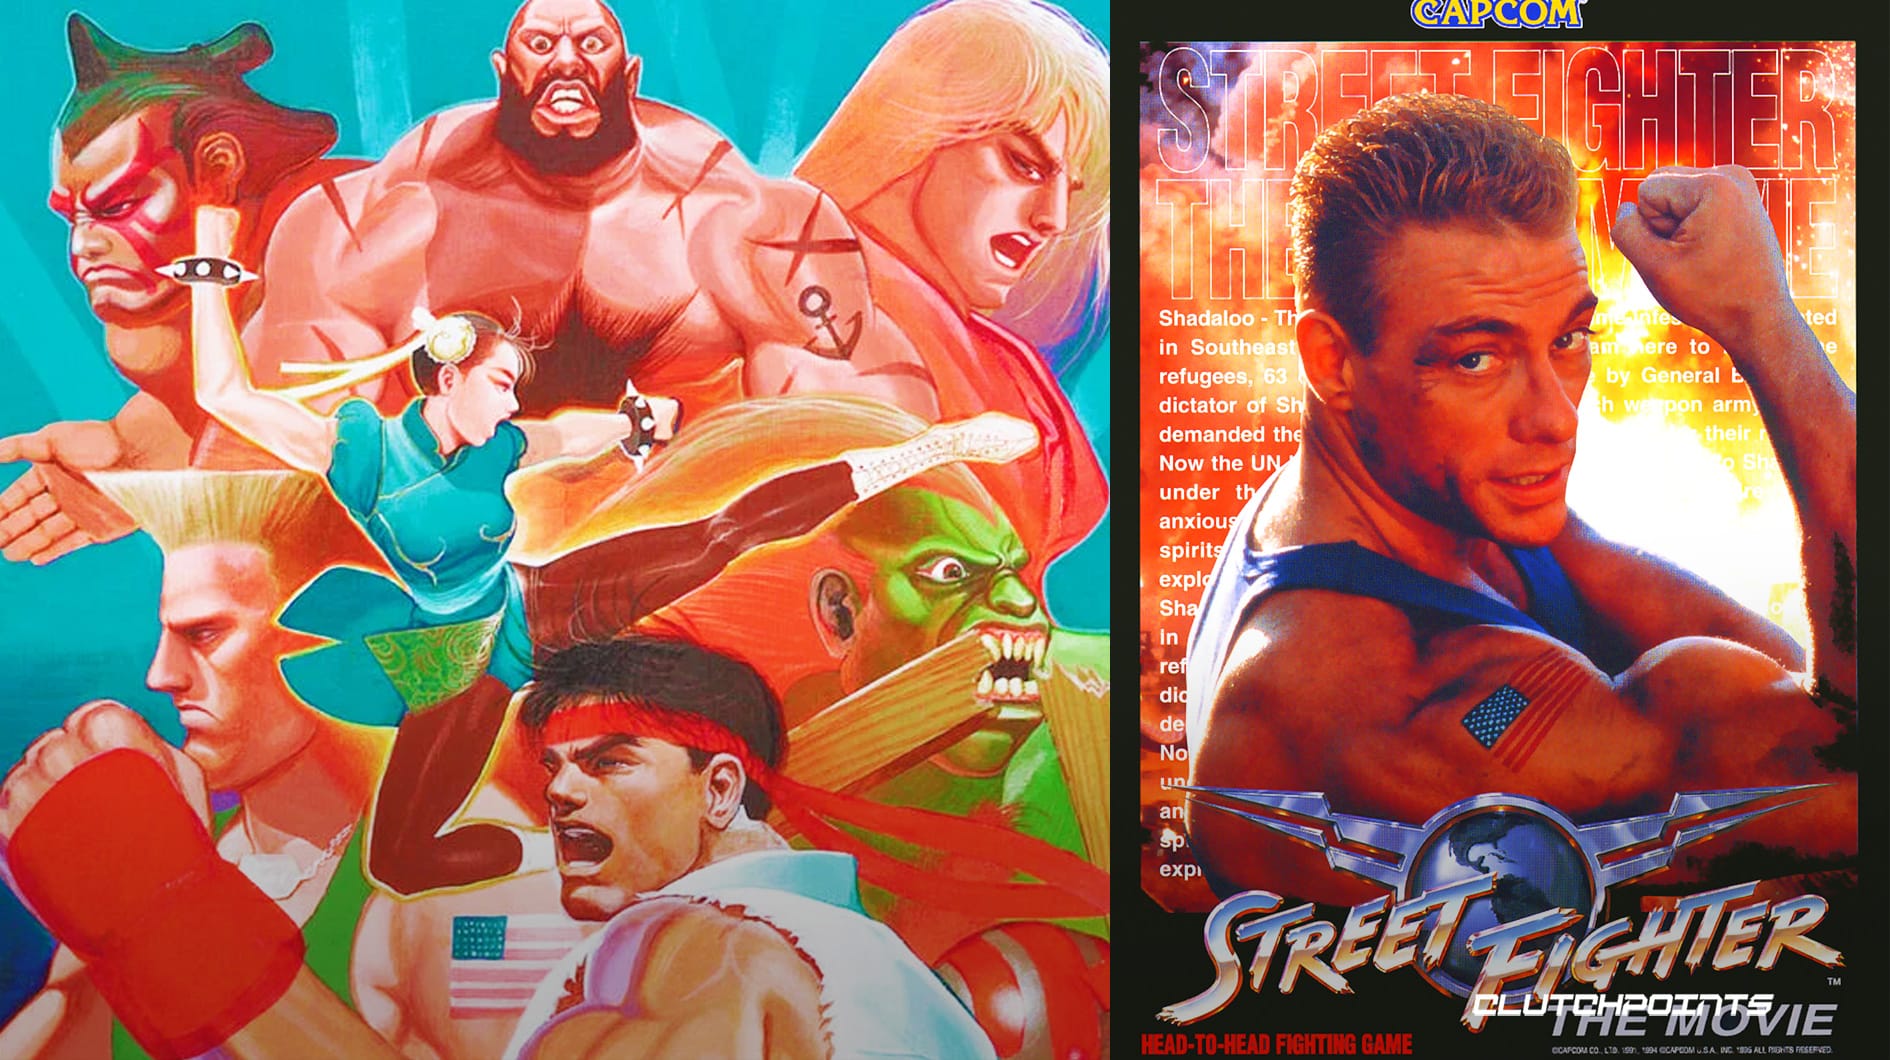 The Street Fighter film and TV rights have been acquired by Legendary